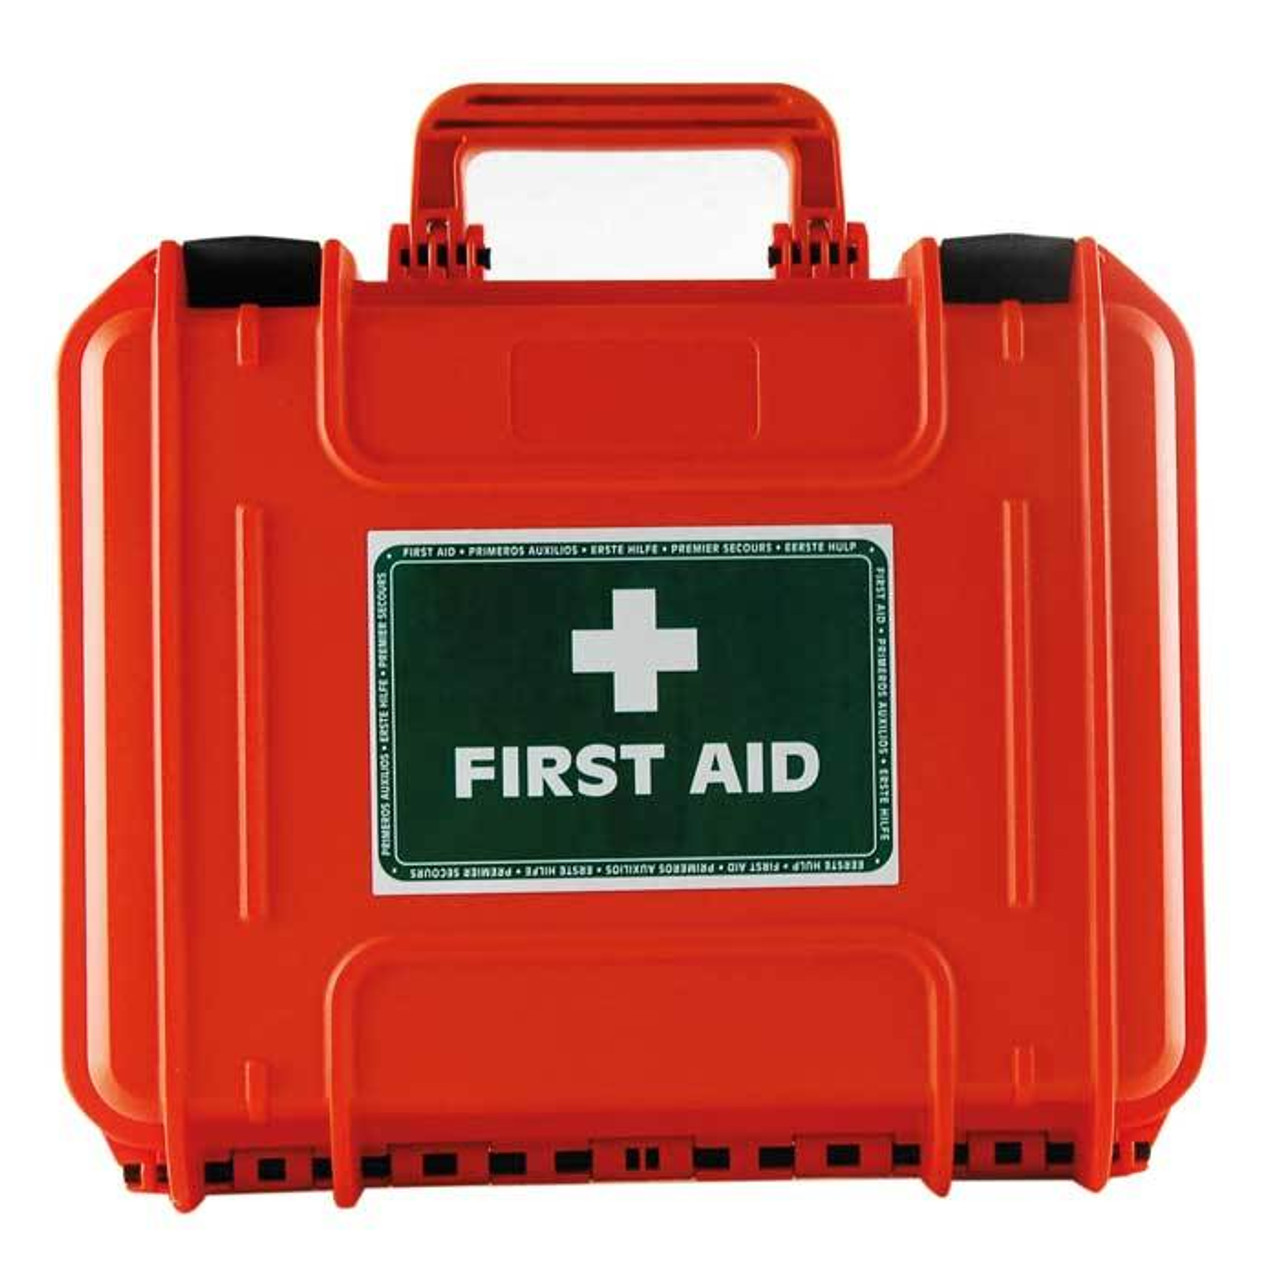 Waterproof, Indestructible, Adventure First Aid Kit - Large